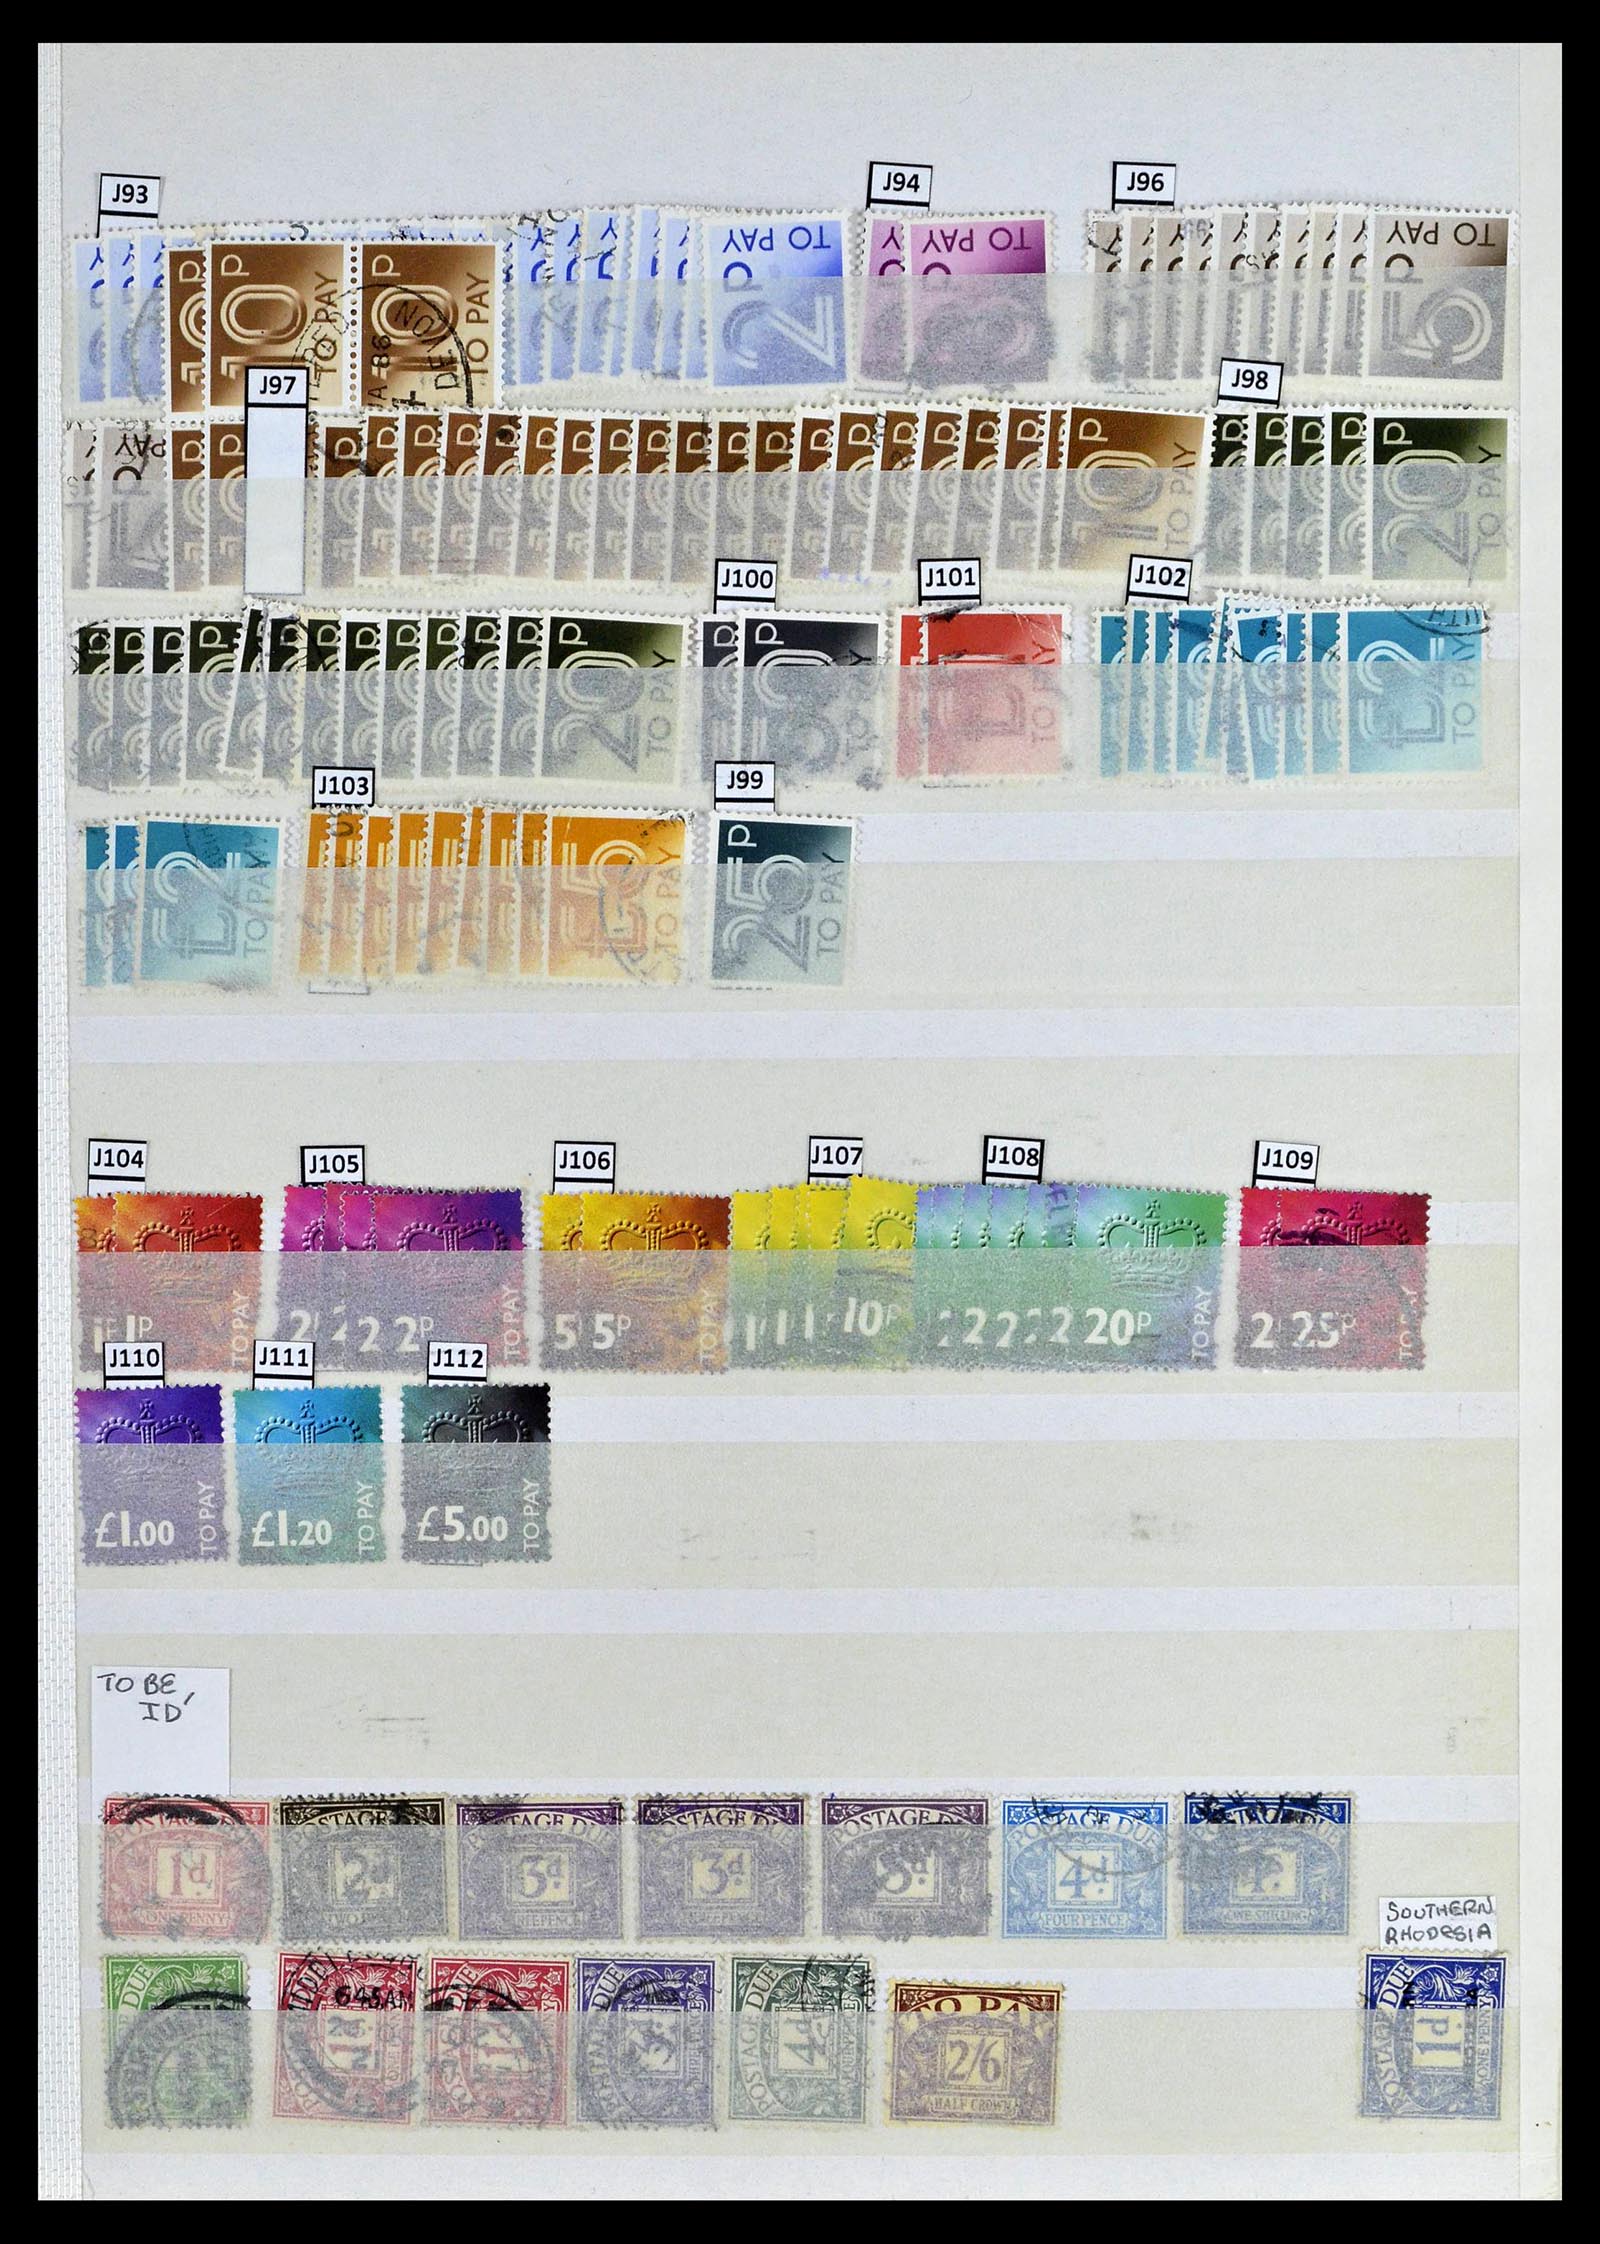 39196 0042 - Stamp collection 39196 Great Britain 1844-1955.